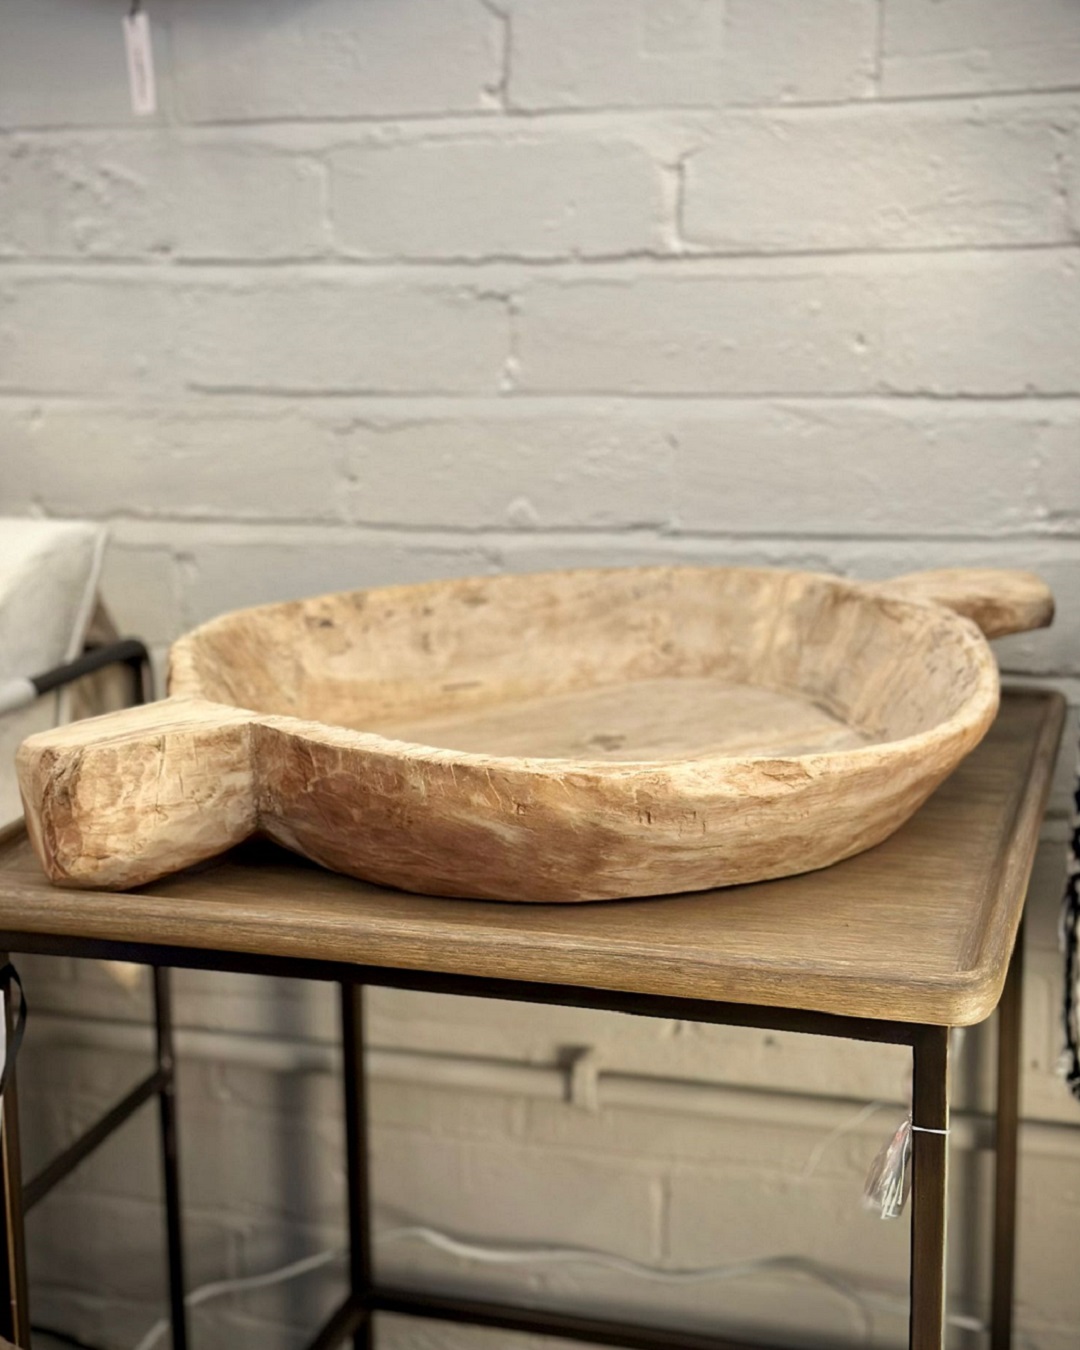 Wooden Chapati bowl on a table